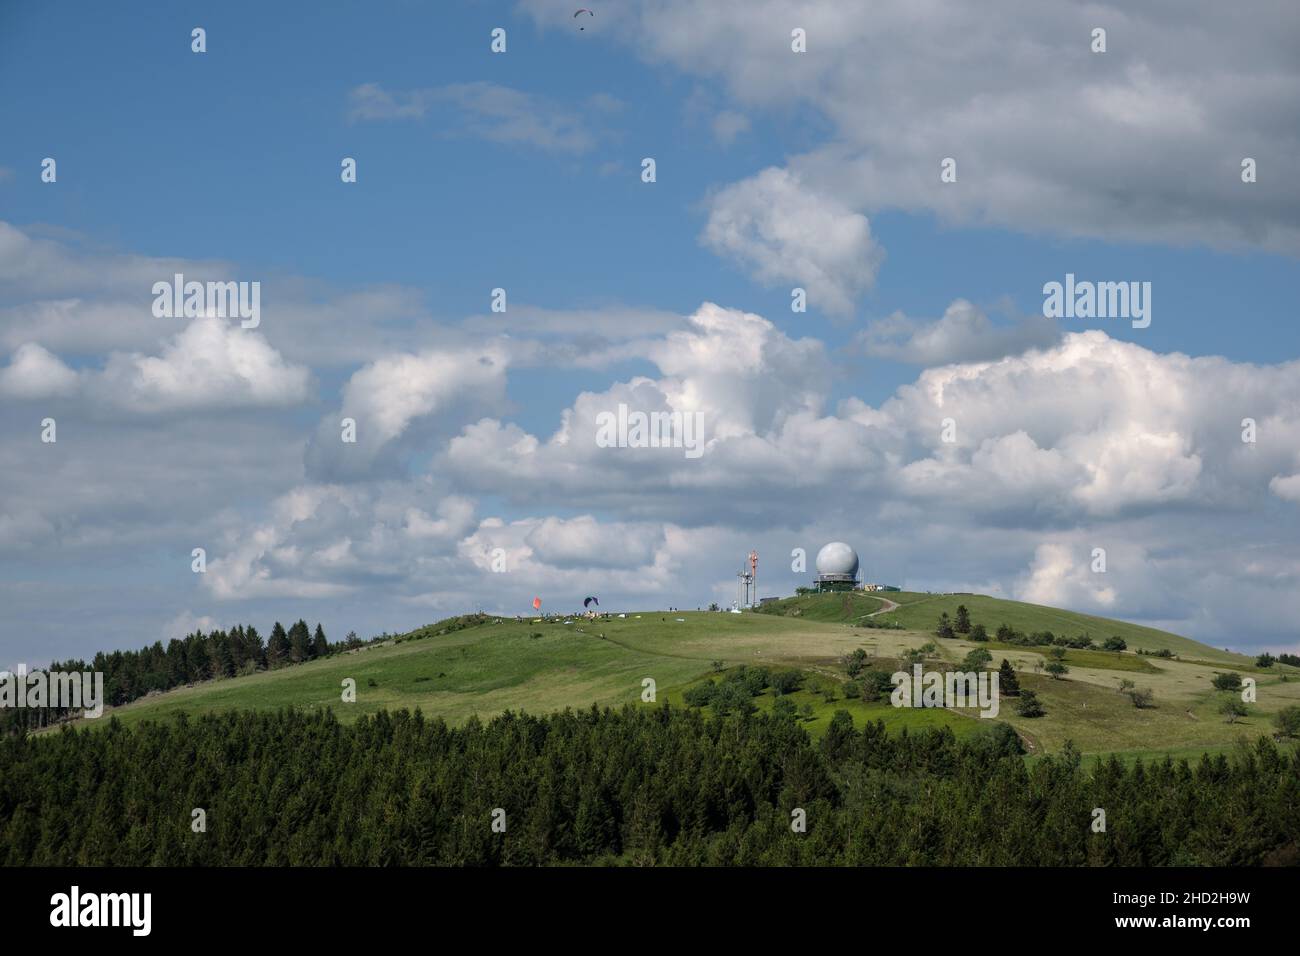 View to the hill Wasserkuppe in nature park Rhön Germany with Radom and paragliding on the ground and in the air. Stock Photo